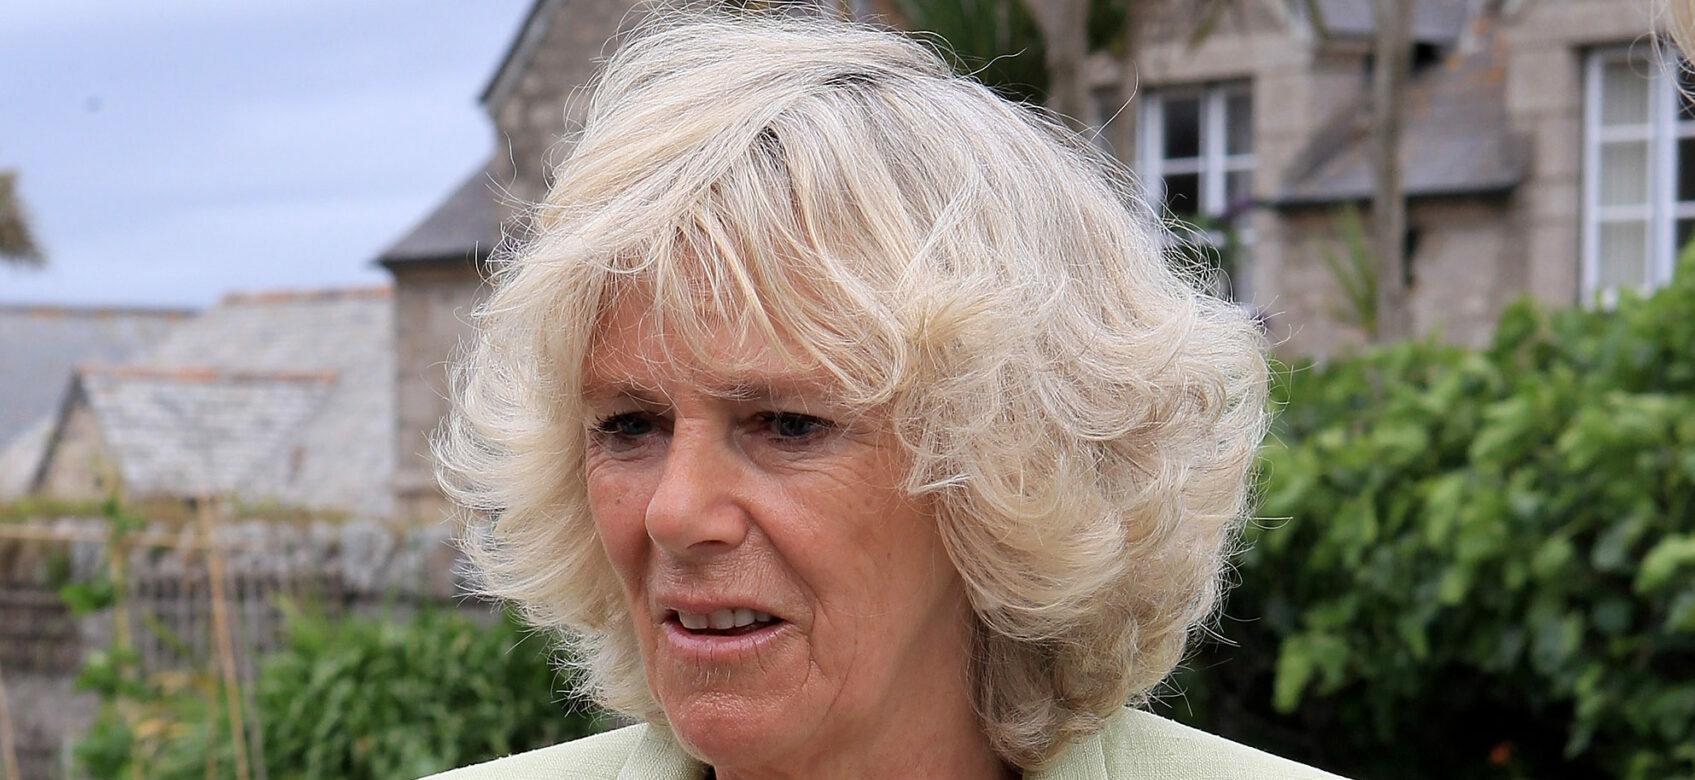 Camilla Duchess of Cornwall smiles as she visits the allotments on St Michael's Mount on July 12, 2010 in Marazion, United Kingdom. The Prince and Duchess are on their annual two day trip to Cornwall.